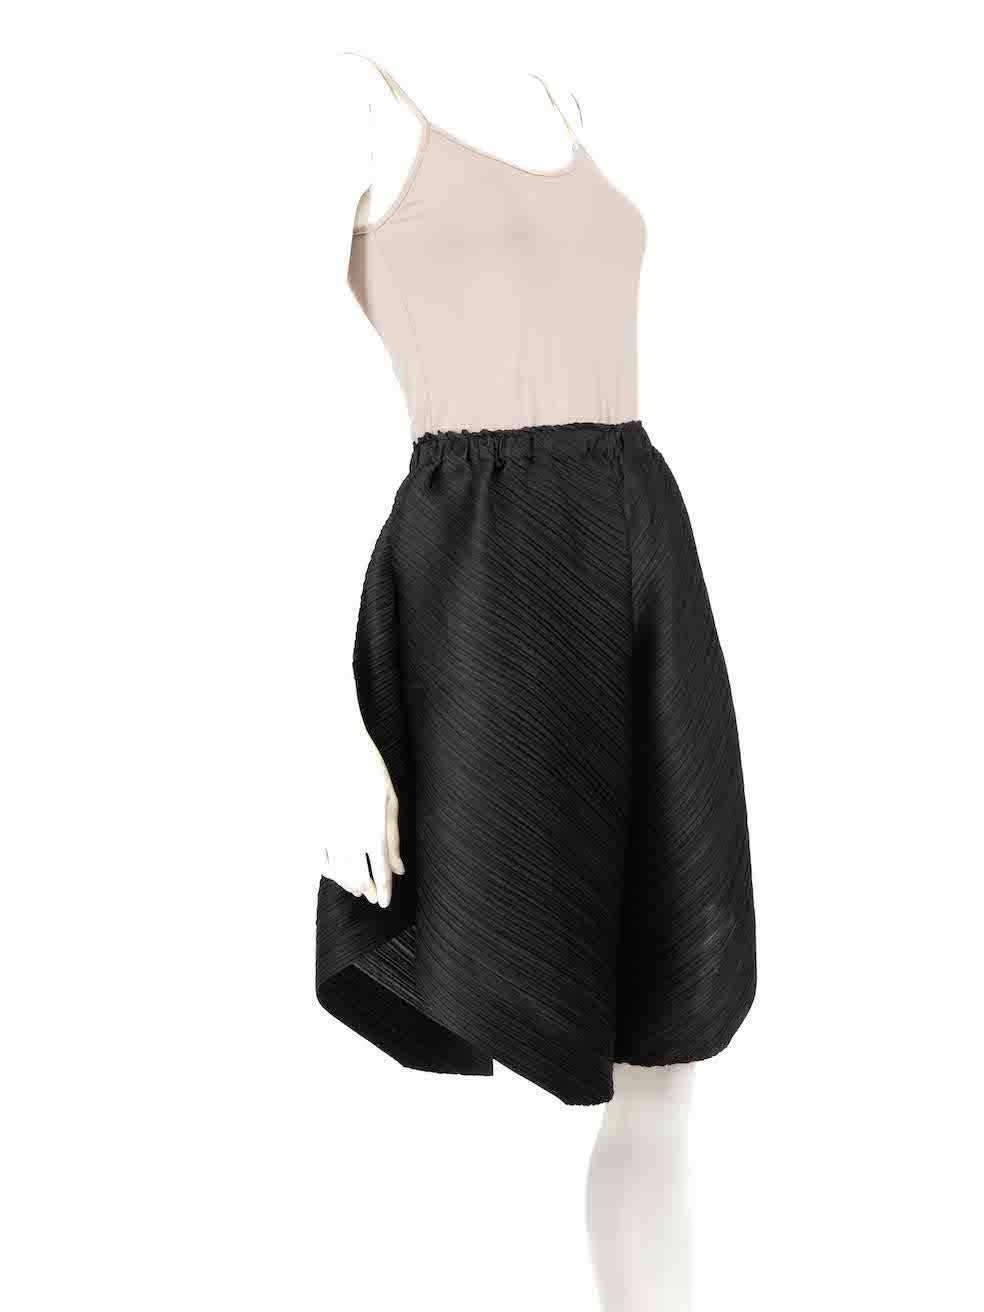 CONDITION is Very good. Hardly any visible wear to shorts is evident on this used Pleats Please by Issey Miyake designer resale item.
 
 
 
 Details
 
 
 Black
 
 Polyester
 
 Shorts
 
 Knee length
 
 Pleated
 
 Elasticated waistband
 
 
 
 
 
 Made